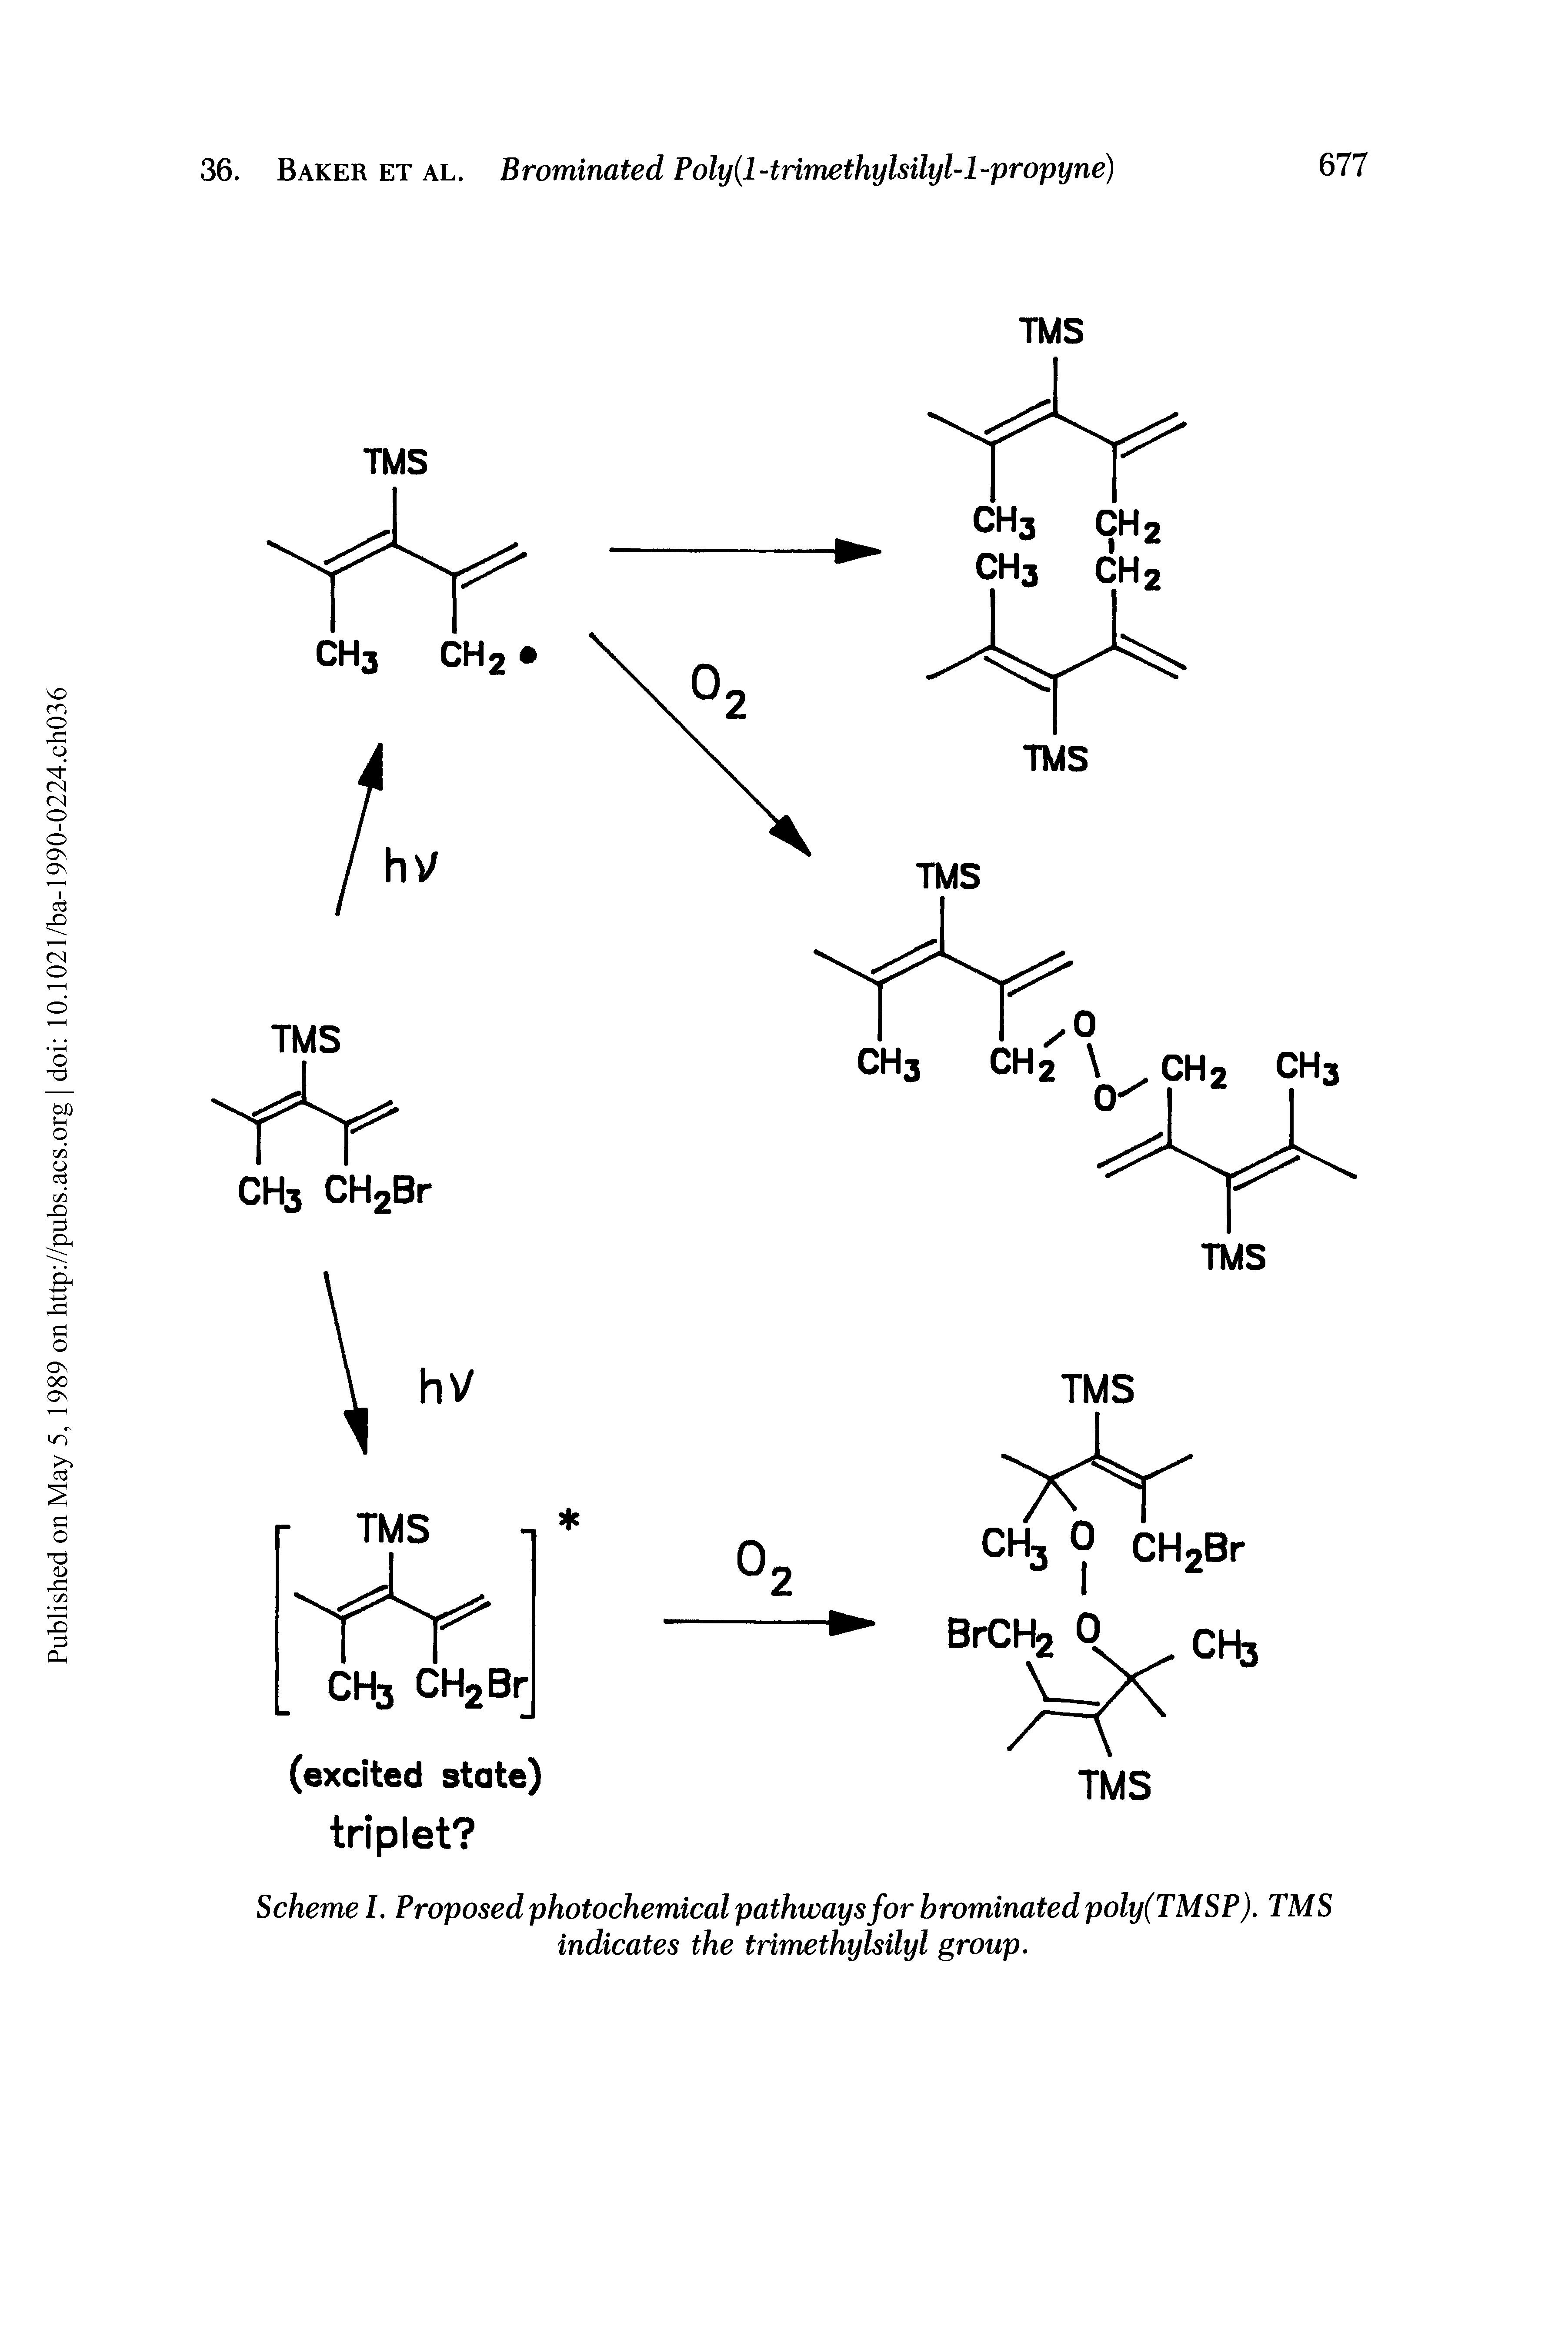 Scheme 1, Proposed photochemical pathways for brominated poly(TMSP). TMS indicates the trimethylsilyl group.